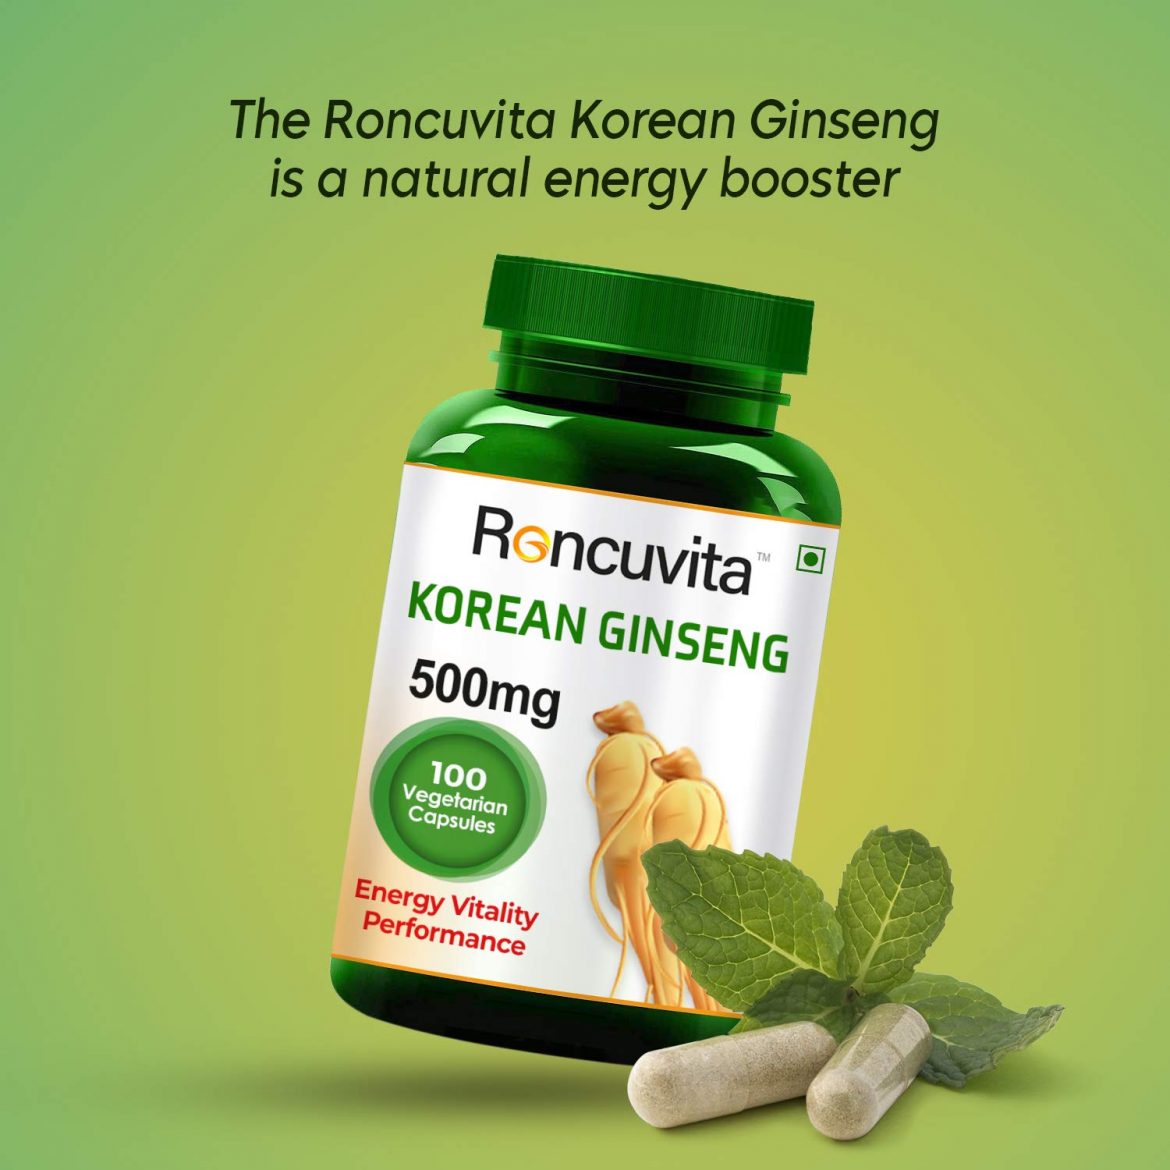 What are Korean Ginseng Benefits?